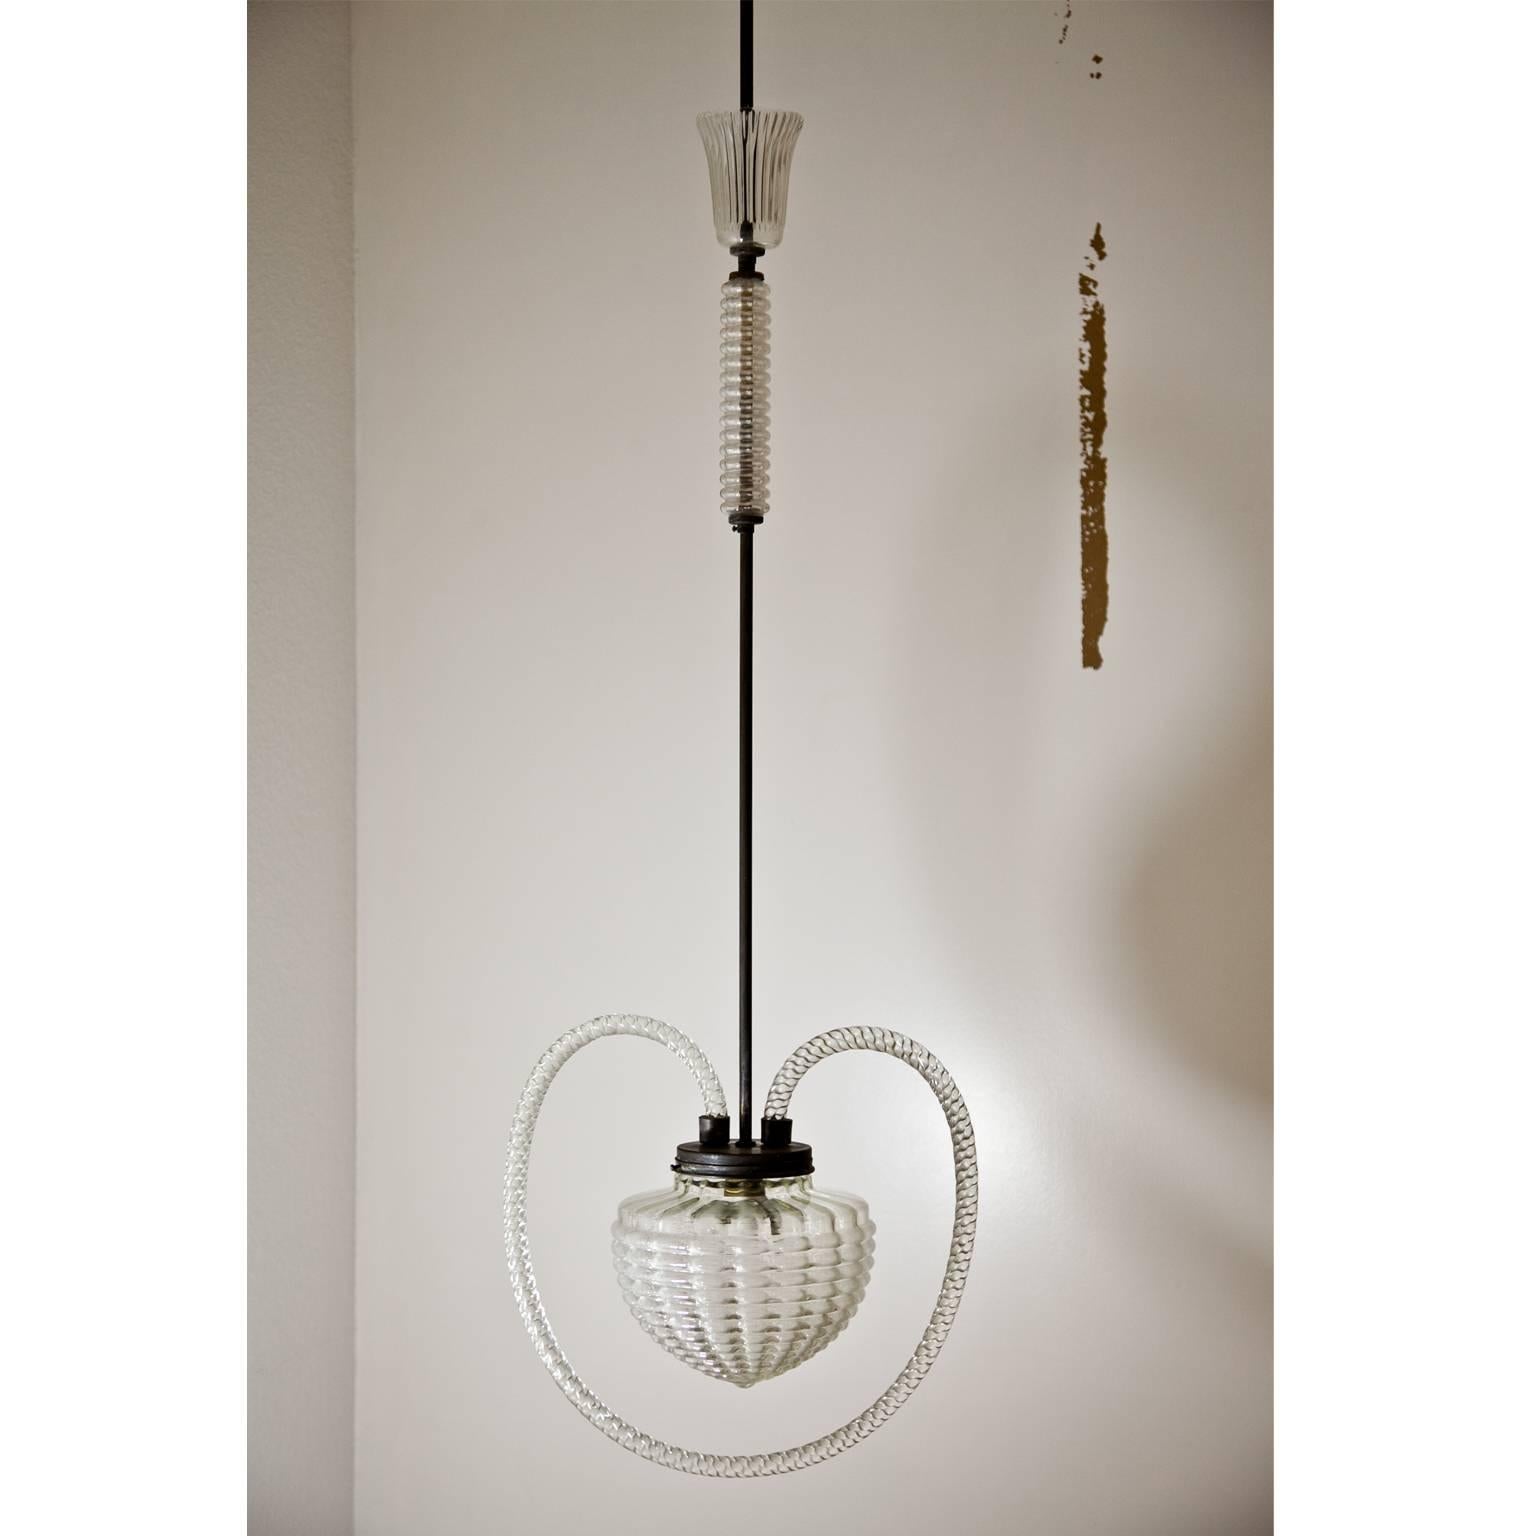 Pendant Lamp, Attributed to Barovier e Toso, Italy, 1940s (Moderne der Mitte des Jahrhunderts)